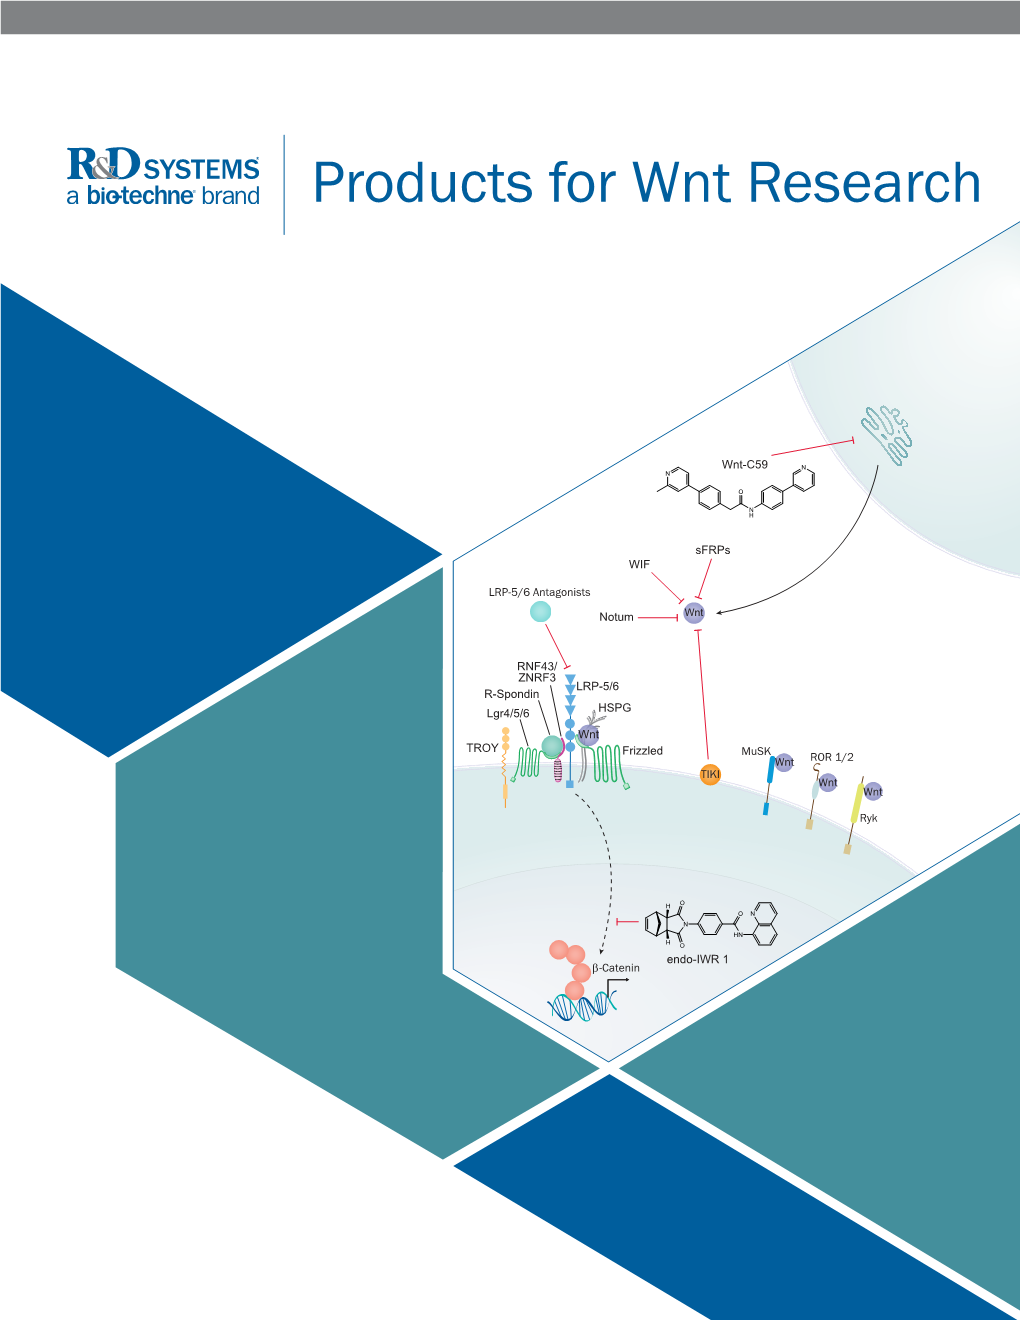 Products for Wnt Research